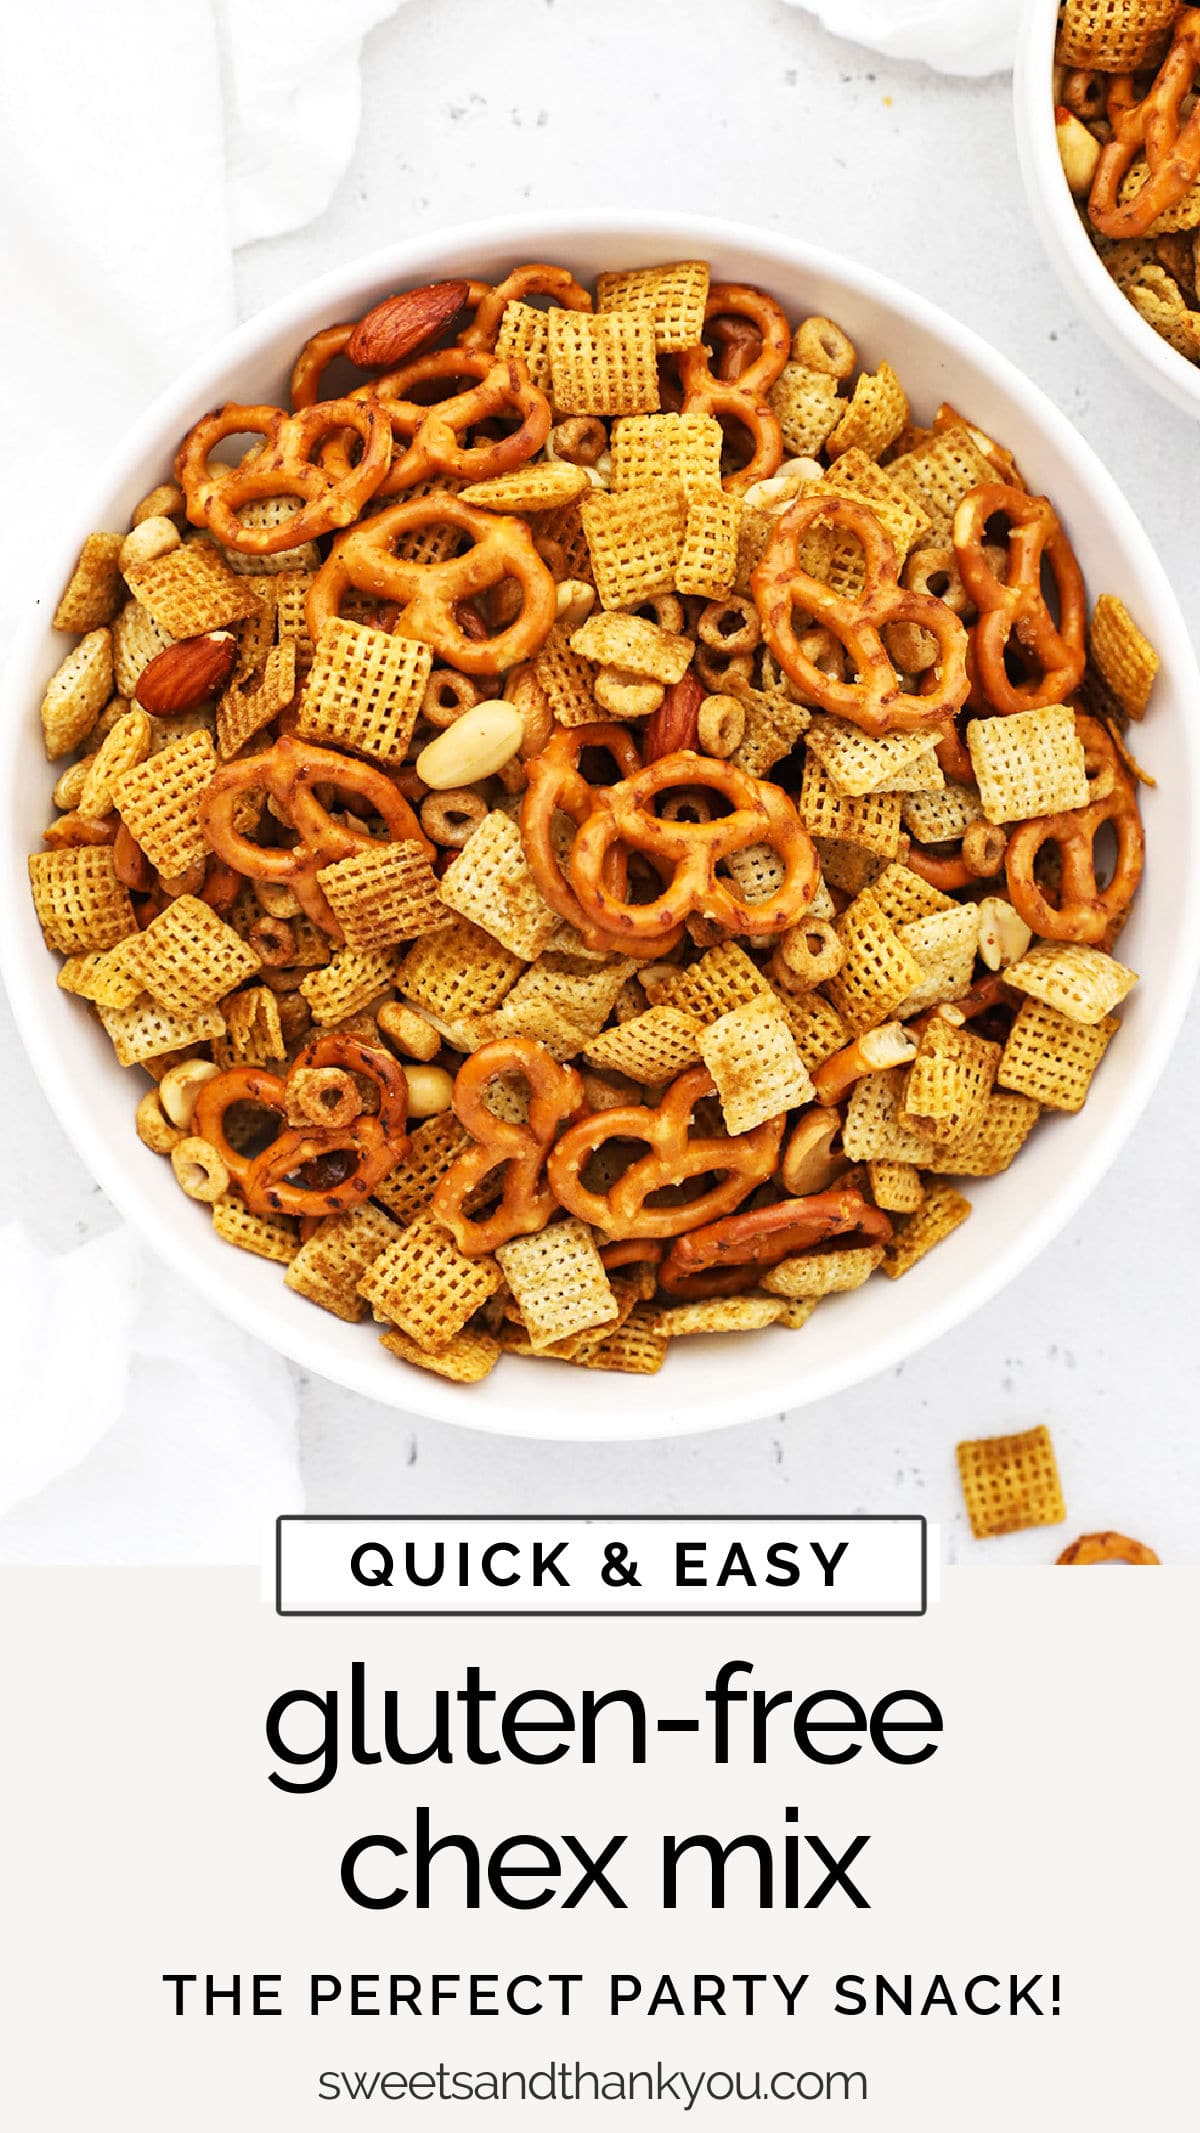 How To Make Gluten-Free Chex Mix  - Our savory gluten-free Chex mix recipe is the perfect party snack! You'll love the crunch & flavor! // gluten-free chex party mix // gluten-free savory chex mix // gluten-free party mix // gluten-free Chex Mix for a party / gluten-free party snacks // gluten-free snack recipe